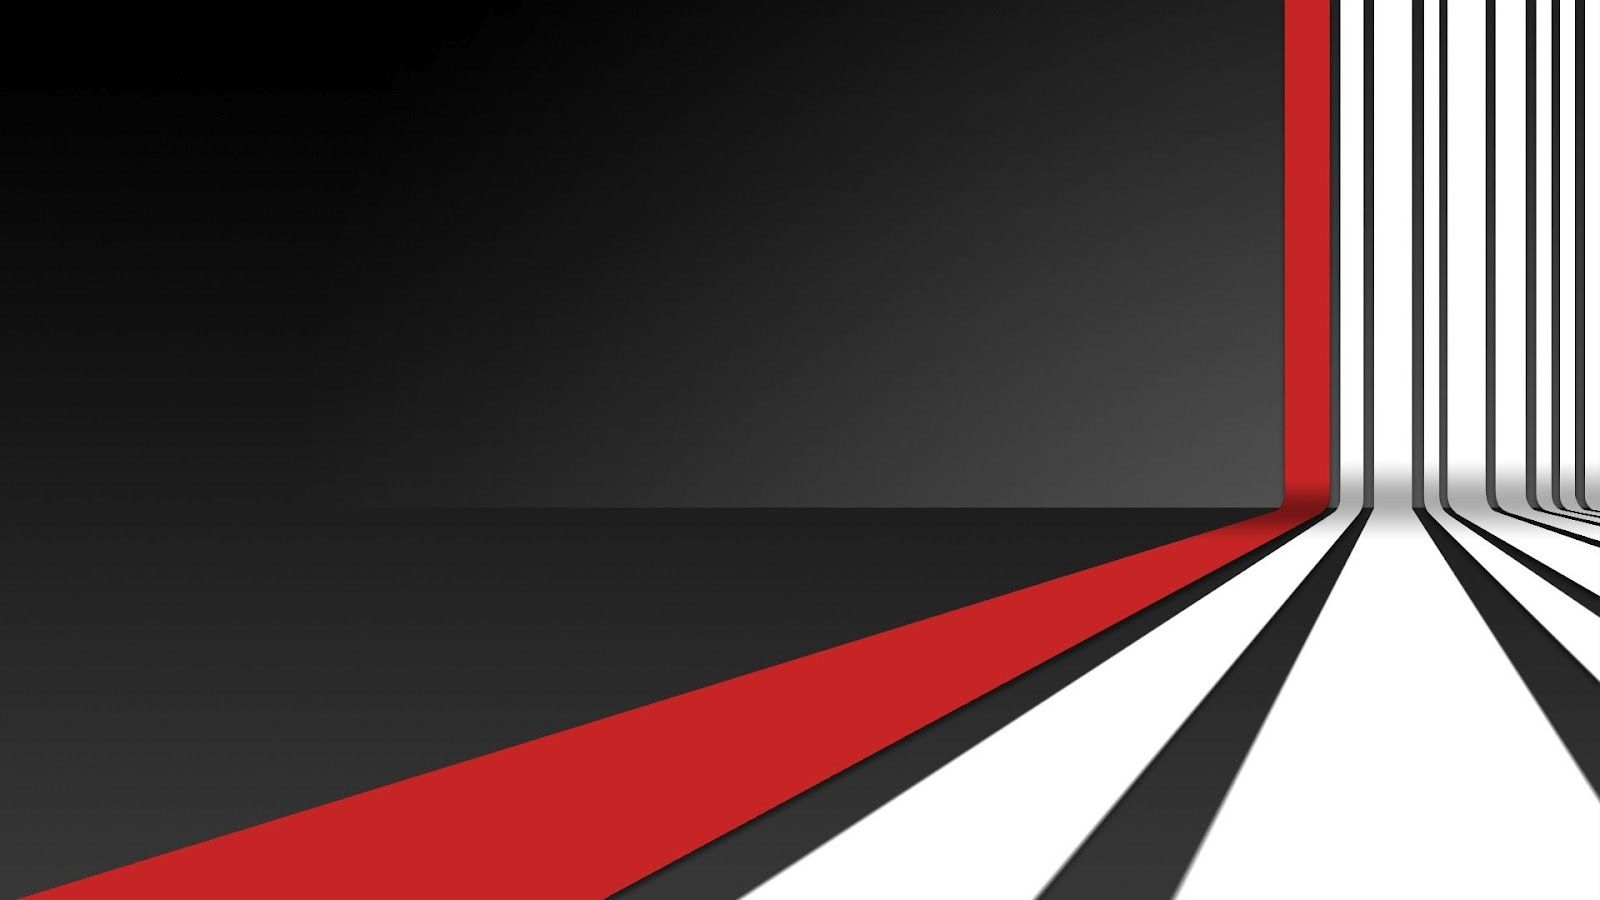 Black and Red HD Wallpapers White Line Background | Hd Wallpapers Love